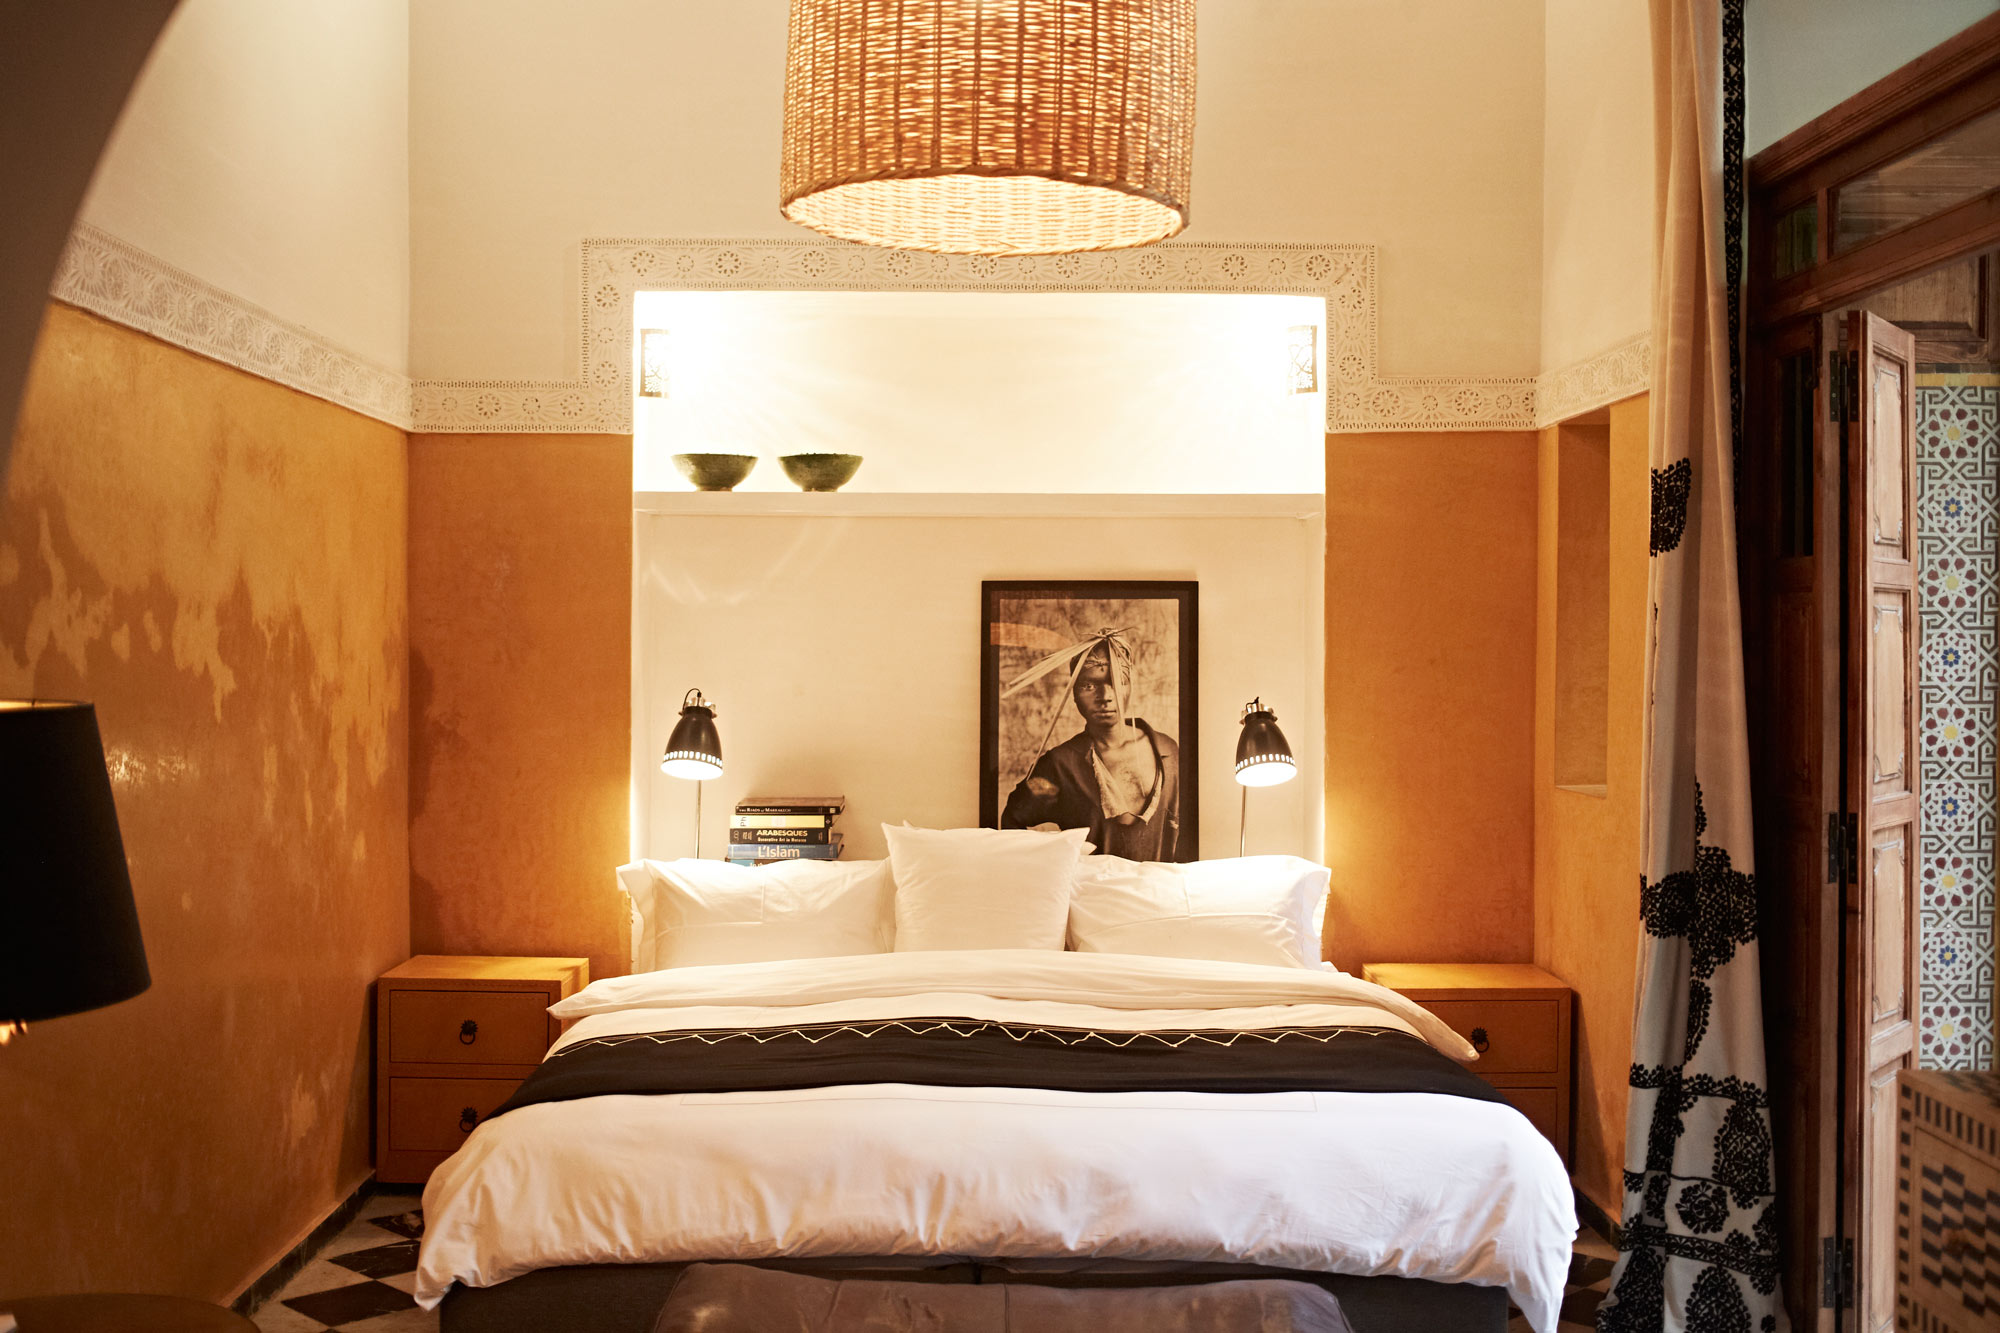 Small Bedroom Décor Ideas With Night Lamps and Hanging Lights - Beautiful Homes